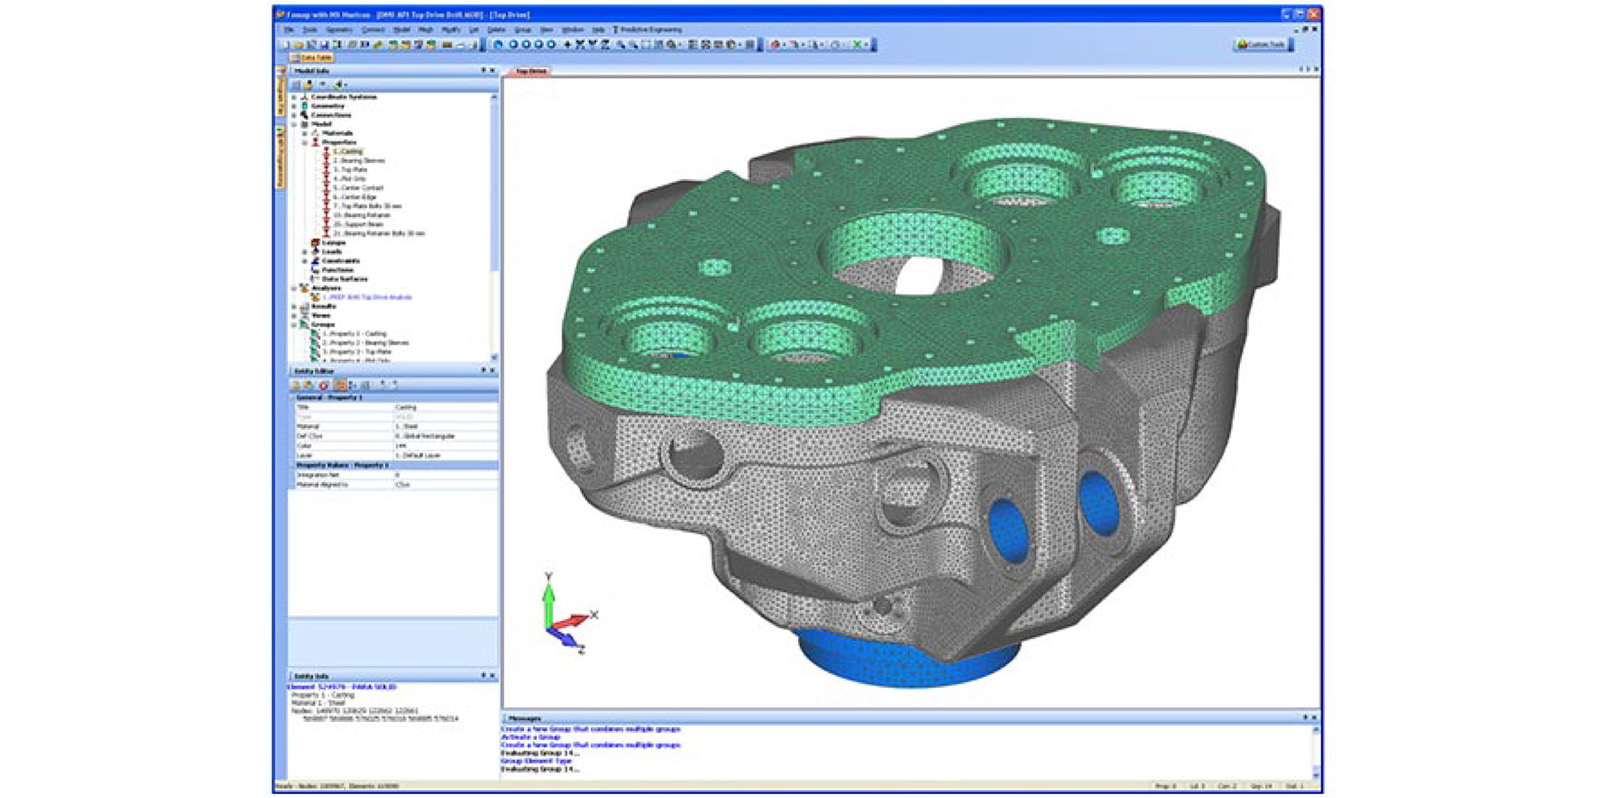 The FEA model is shown of the Top Drive Drill assembly - Predictive Engineering FEA Consulting Services